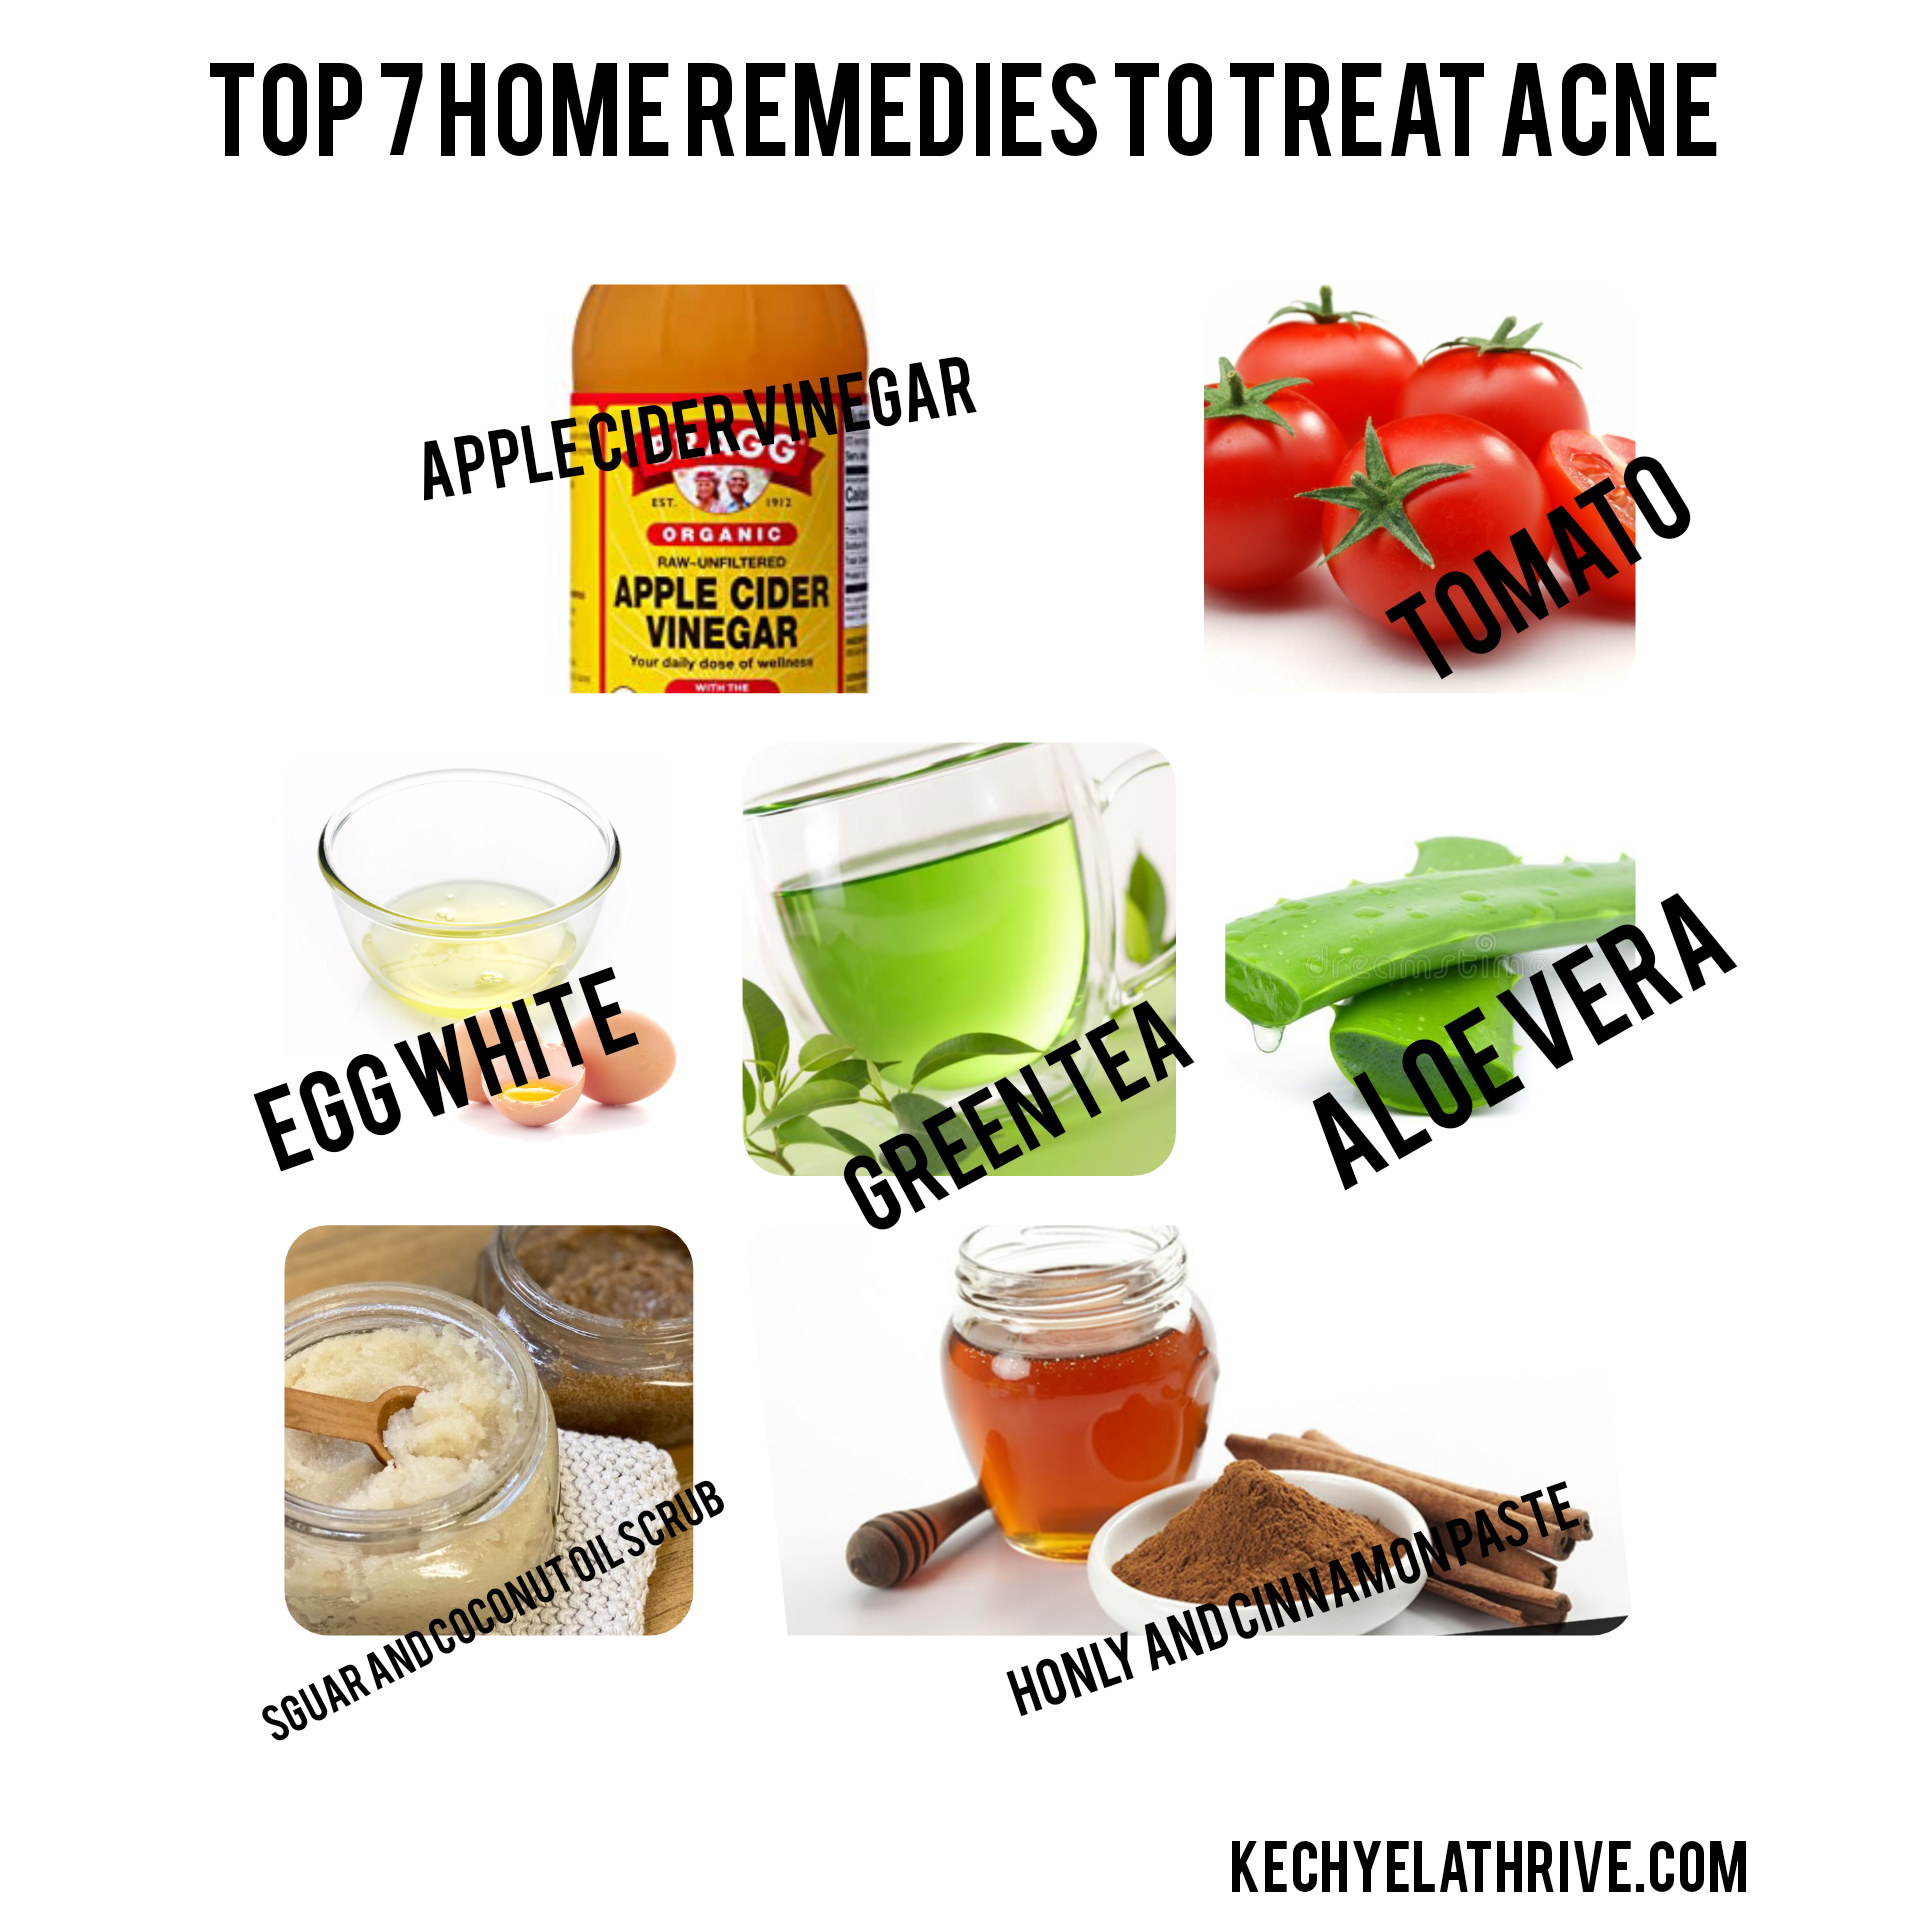 HOW TO TREAT ACNE AT HOME: TOP 7 HOME REMEDIES